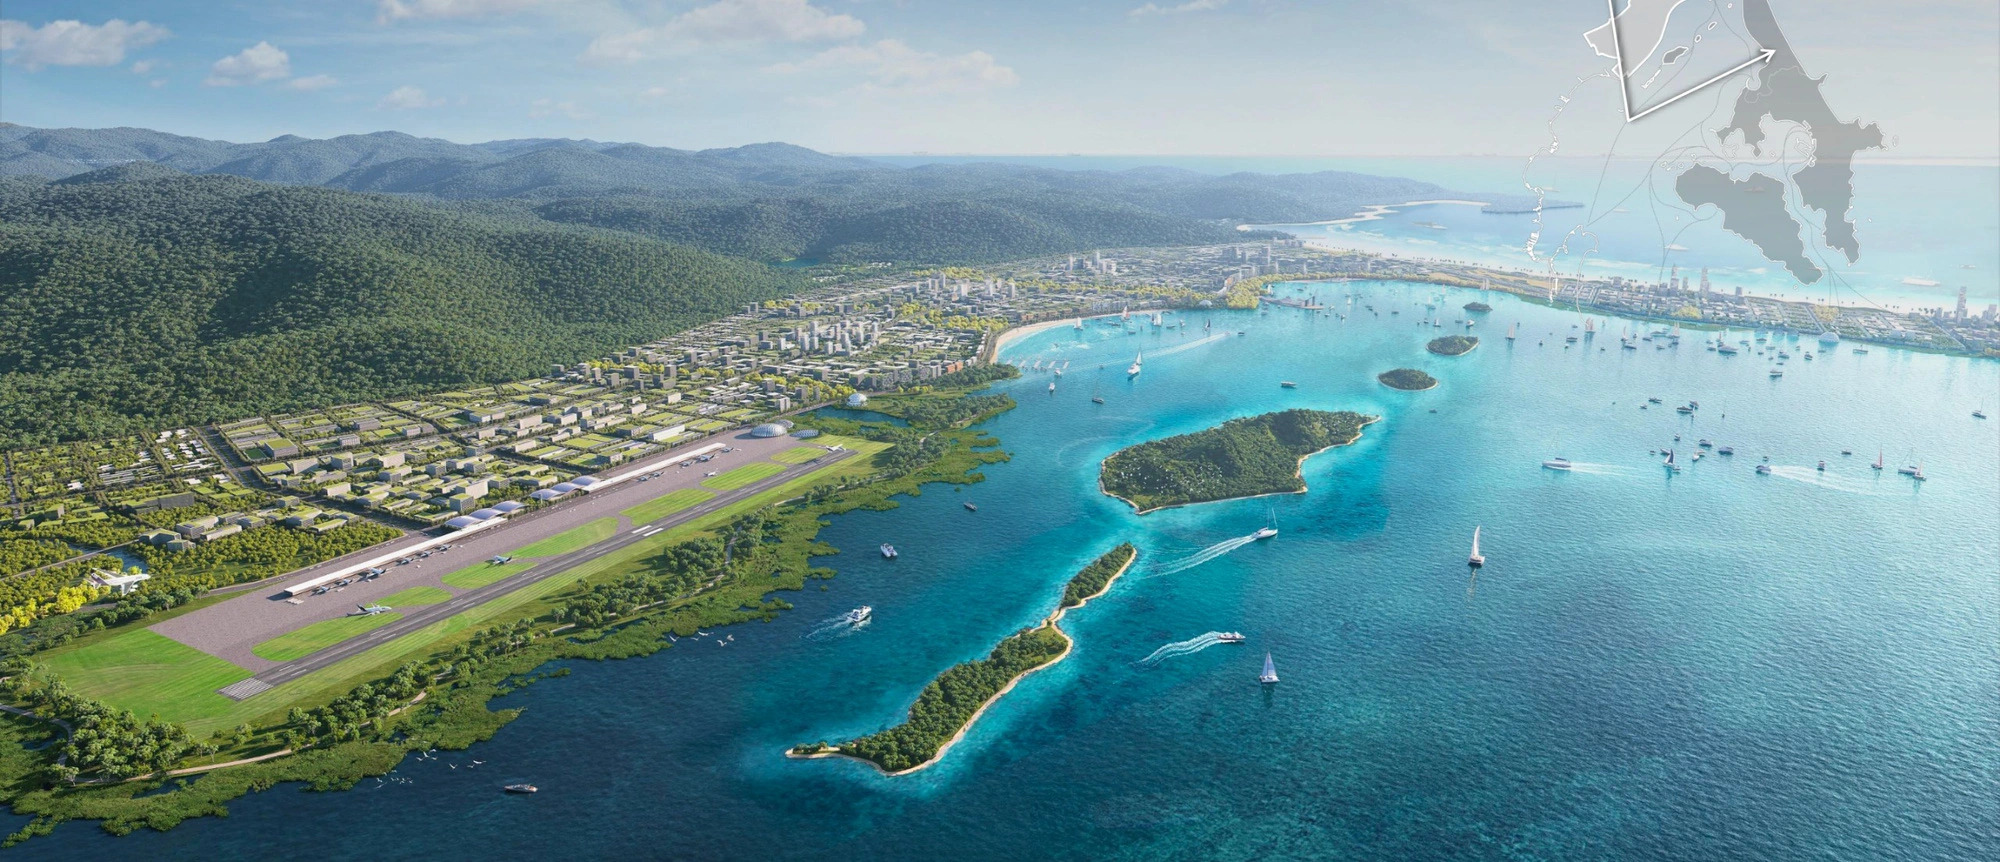 Airport project worth over $287mn proposed in Vietnam’s Khanh Hoa